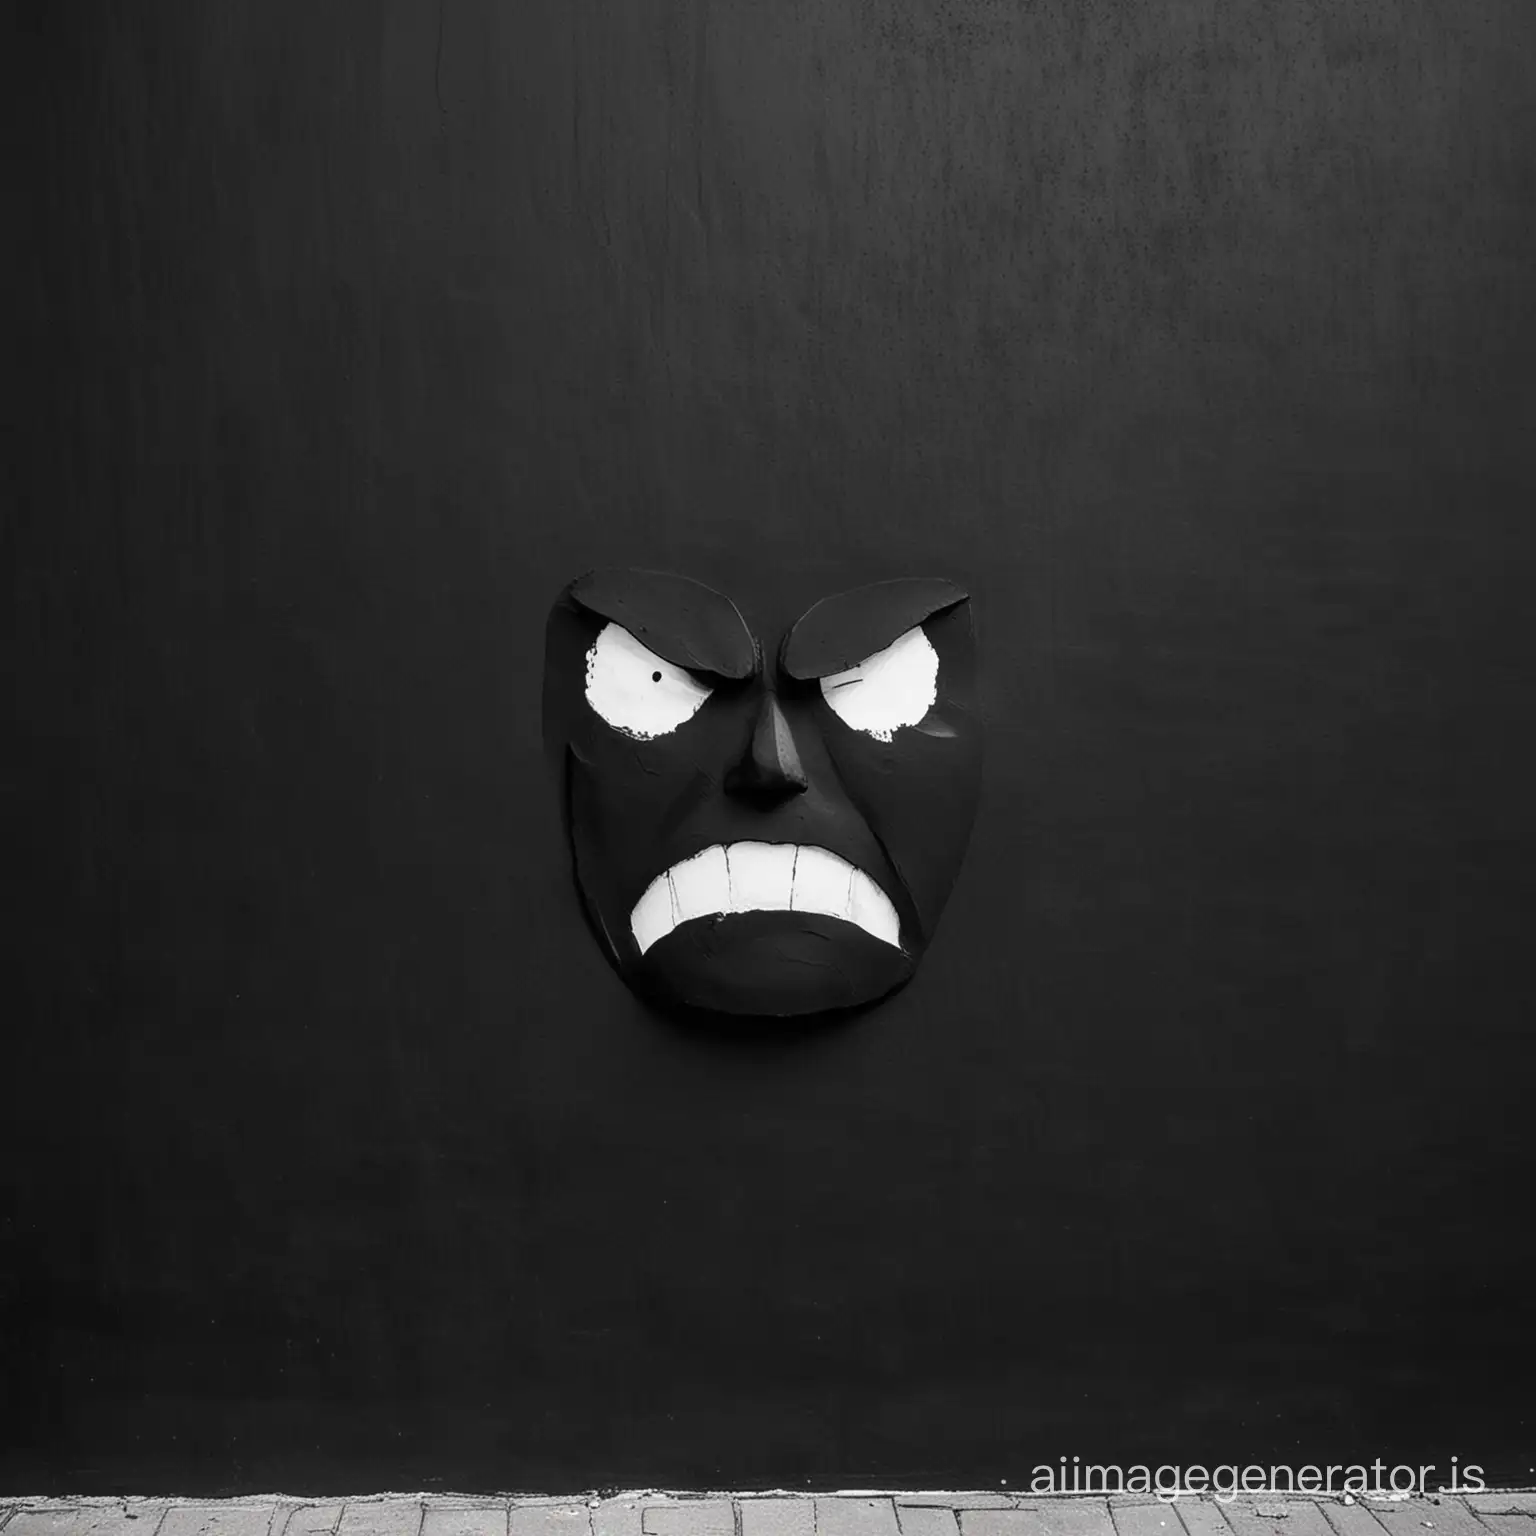 Mysterious-Black-Wall-with-Frowning-Face